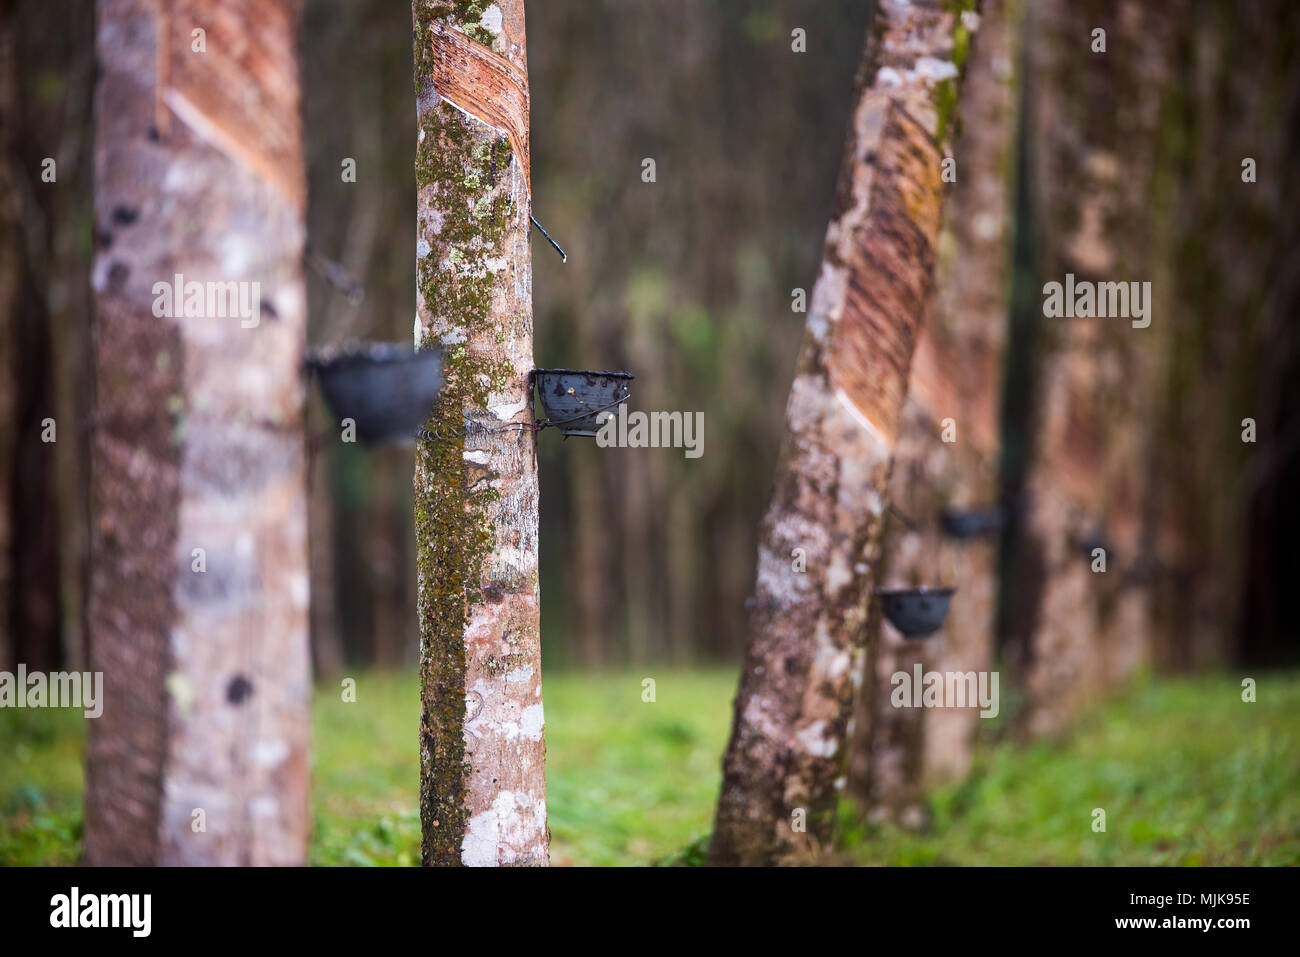 Rubber support rubber tree. Stock Photo